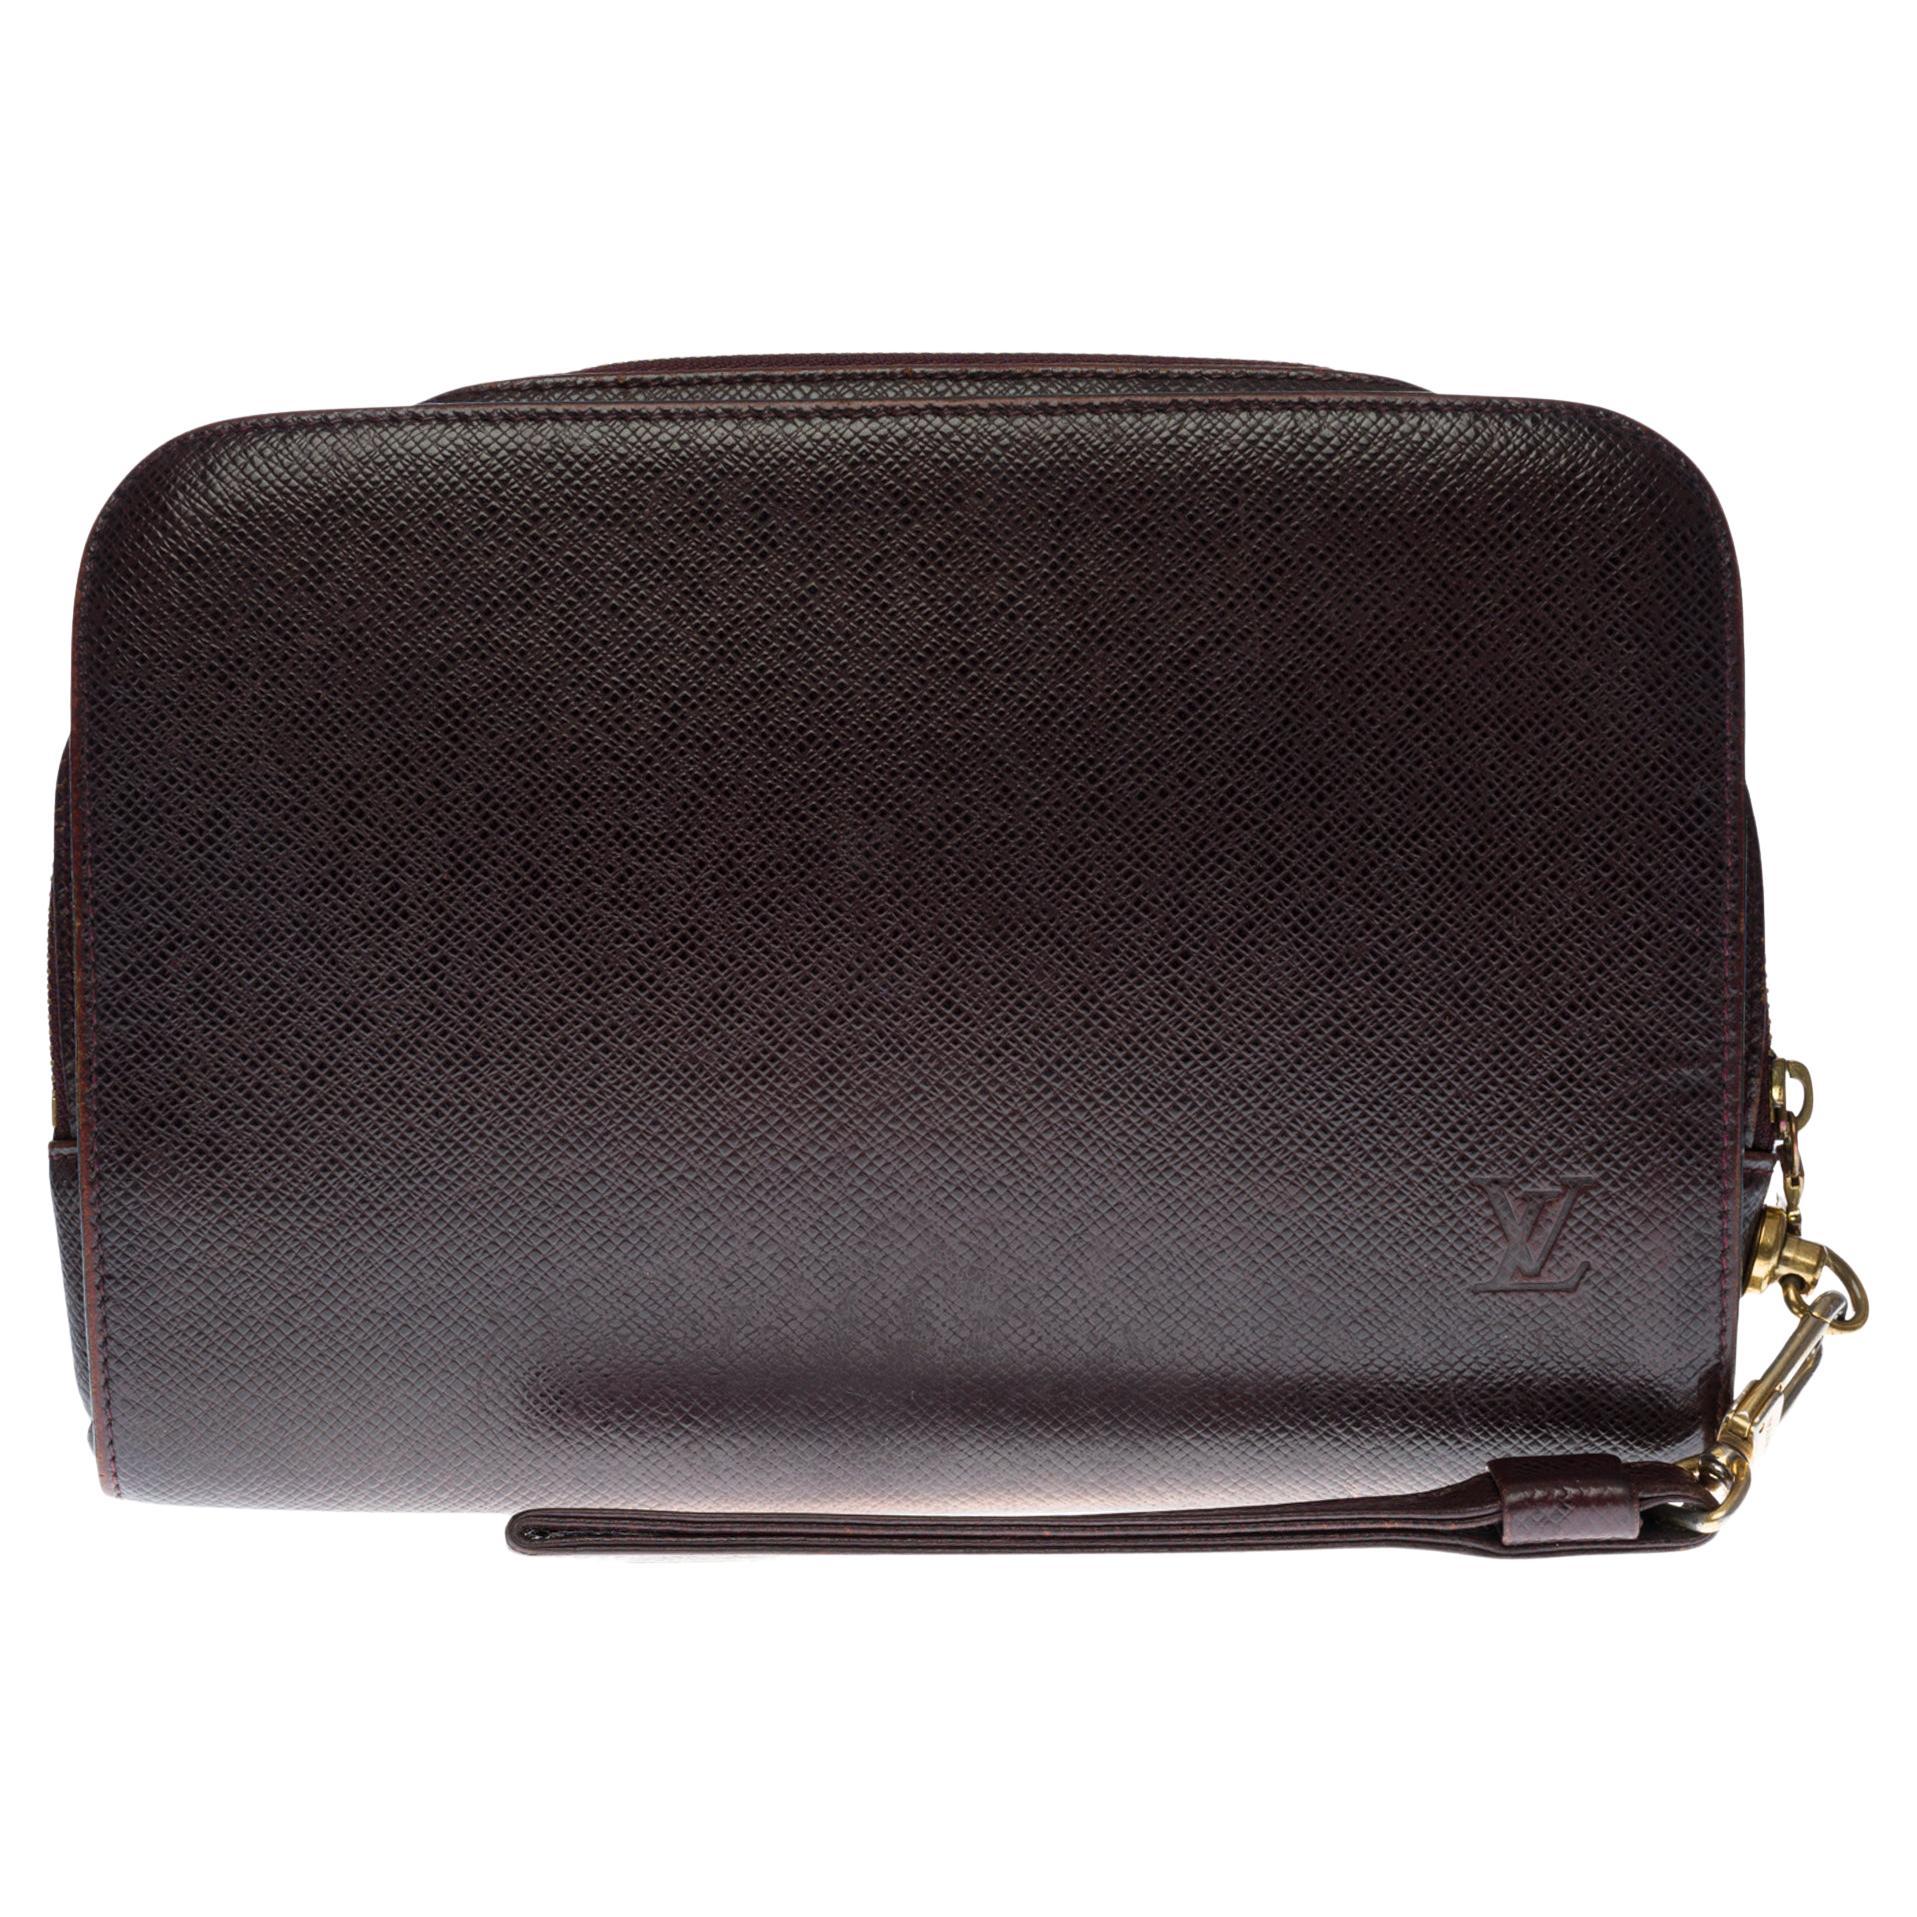 Louis Vuitton Satchel in brown Taïga leather and gold hardware